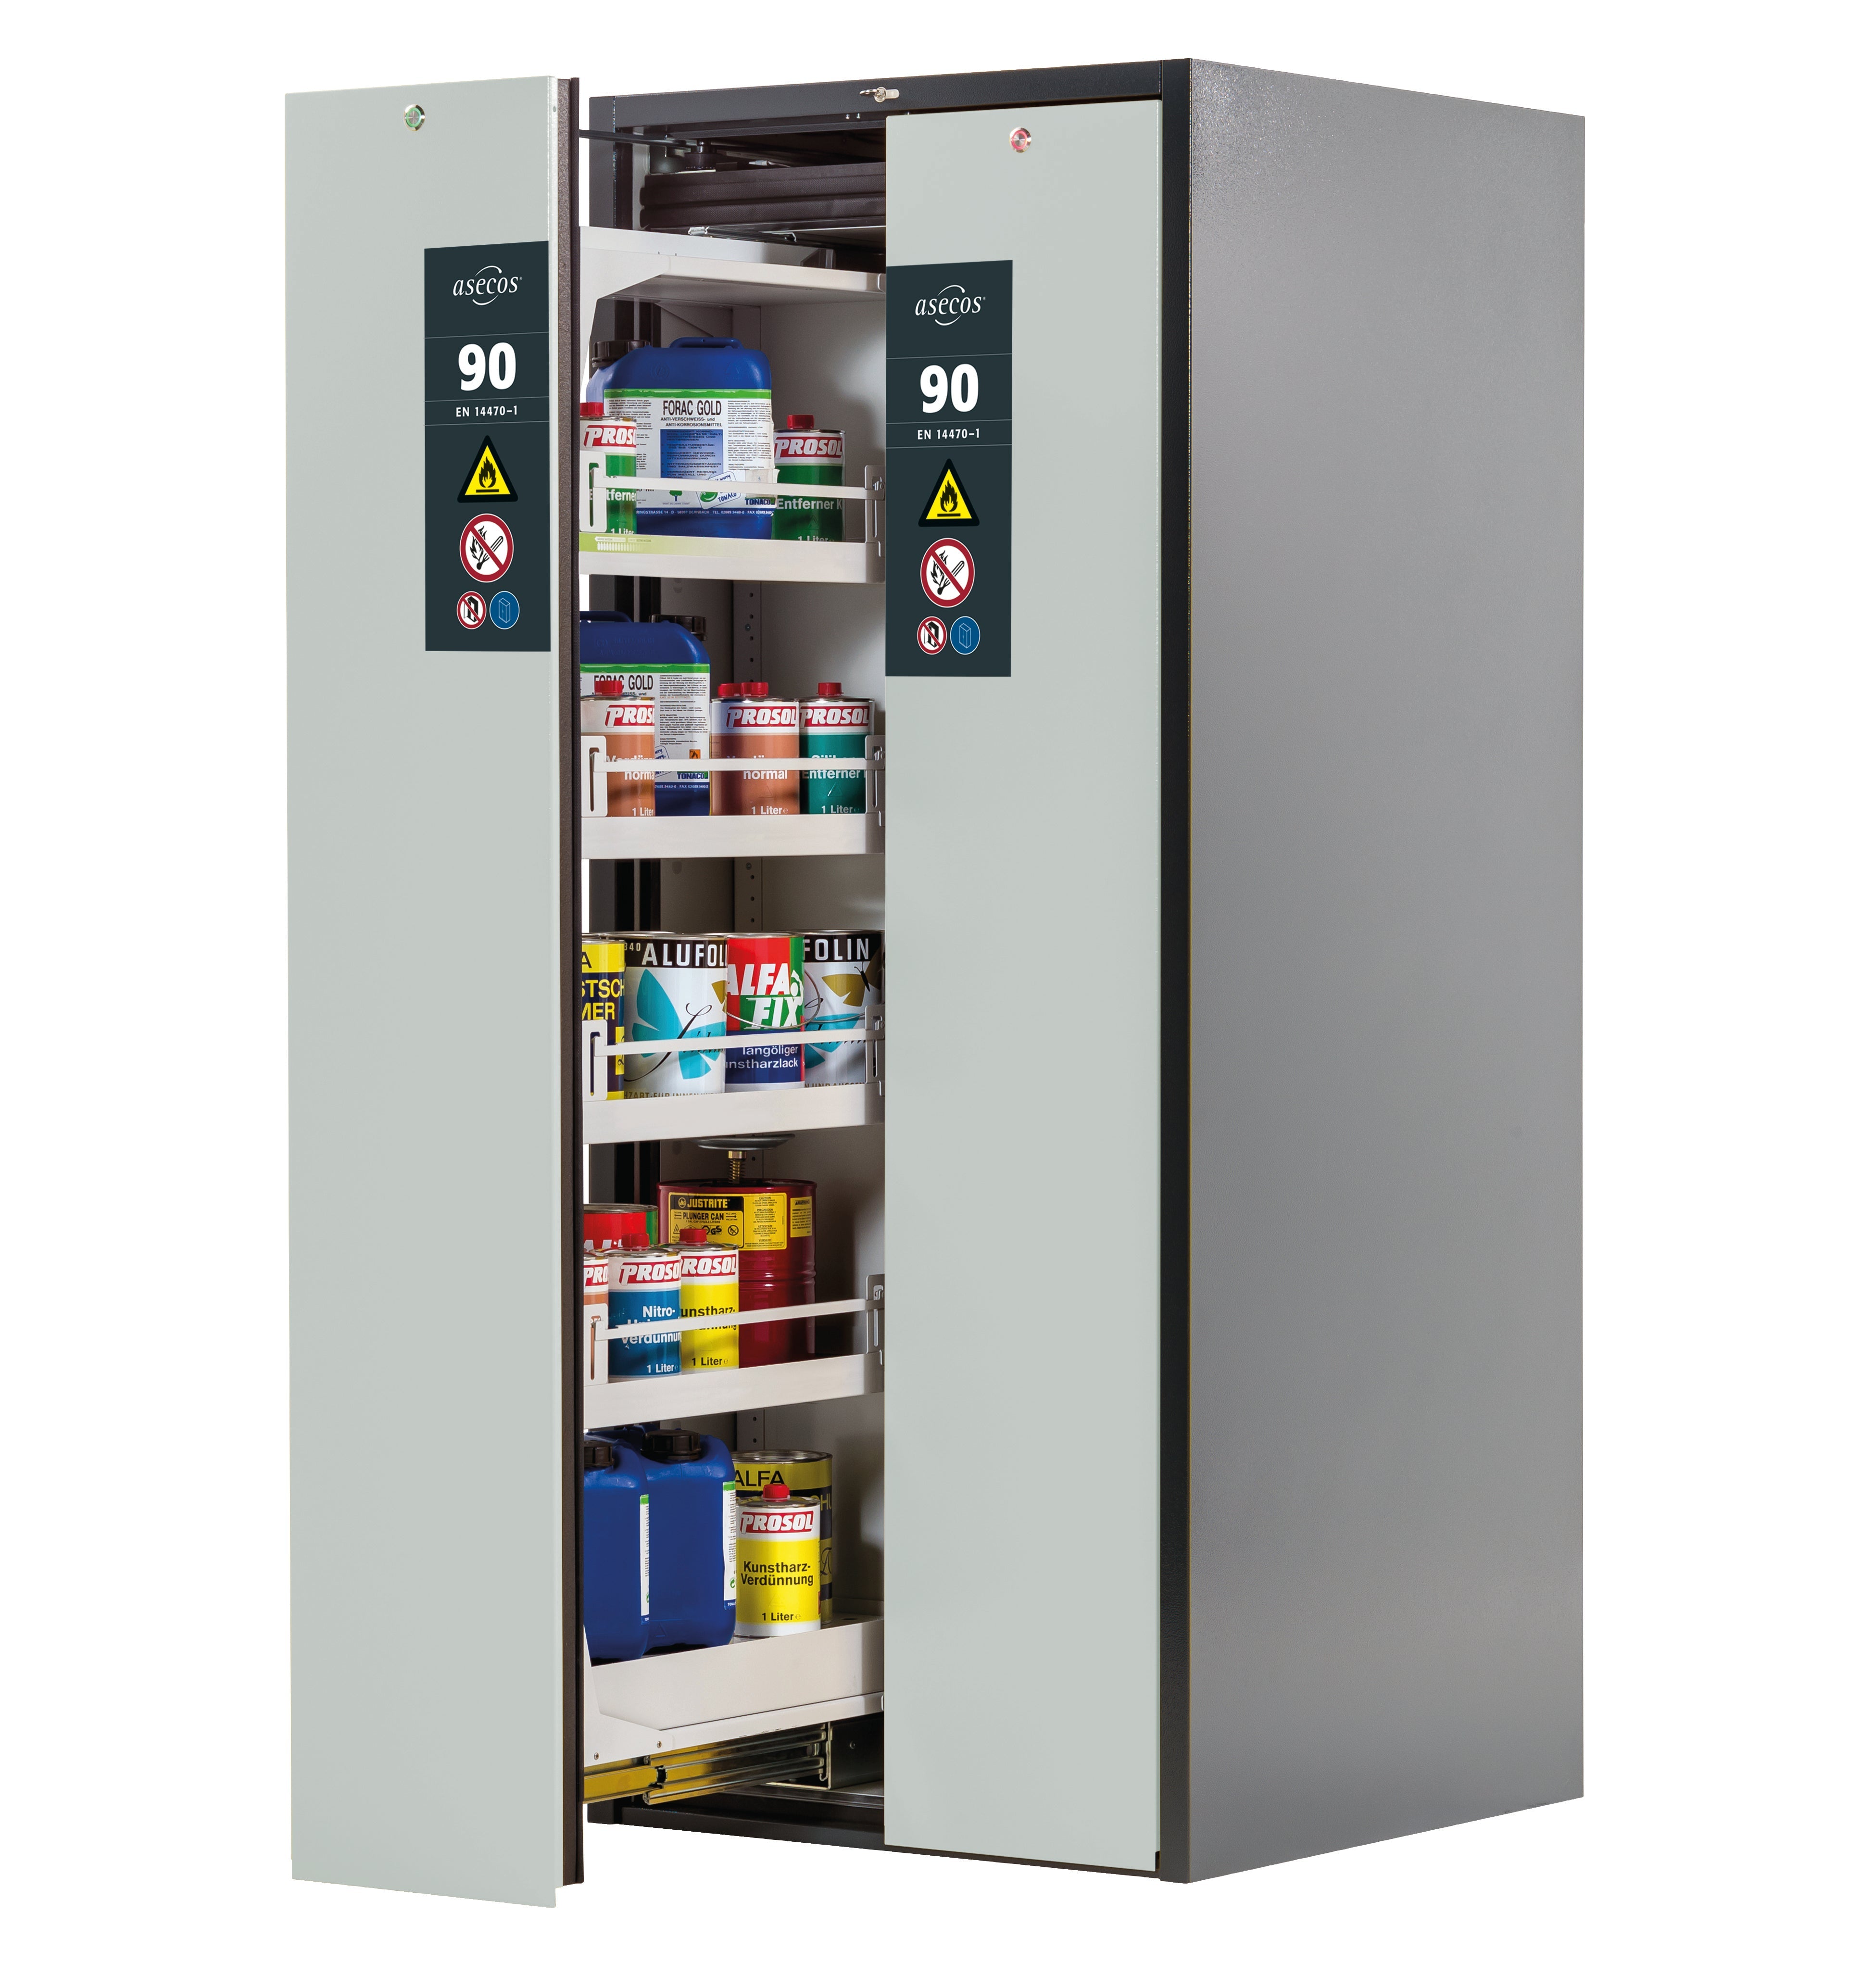 Type 90 safety cabinet V-MOVE-90 model V90.196.081.VDAC:0013 in light gray RAL 7035 with 4x standard tray base (sheet steel)